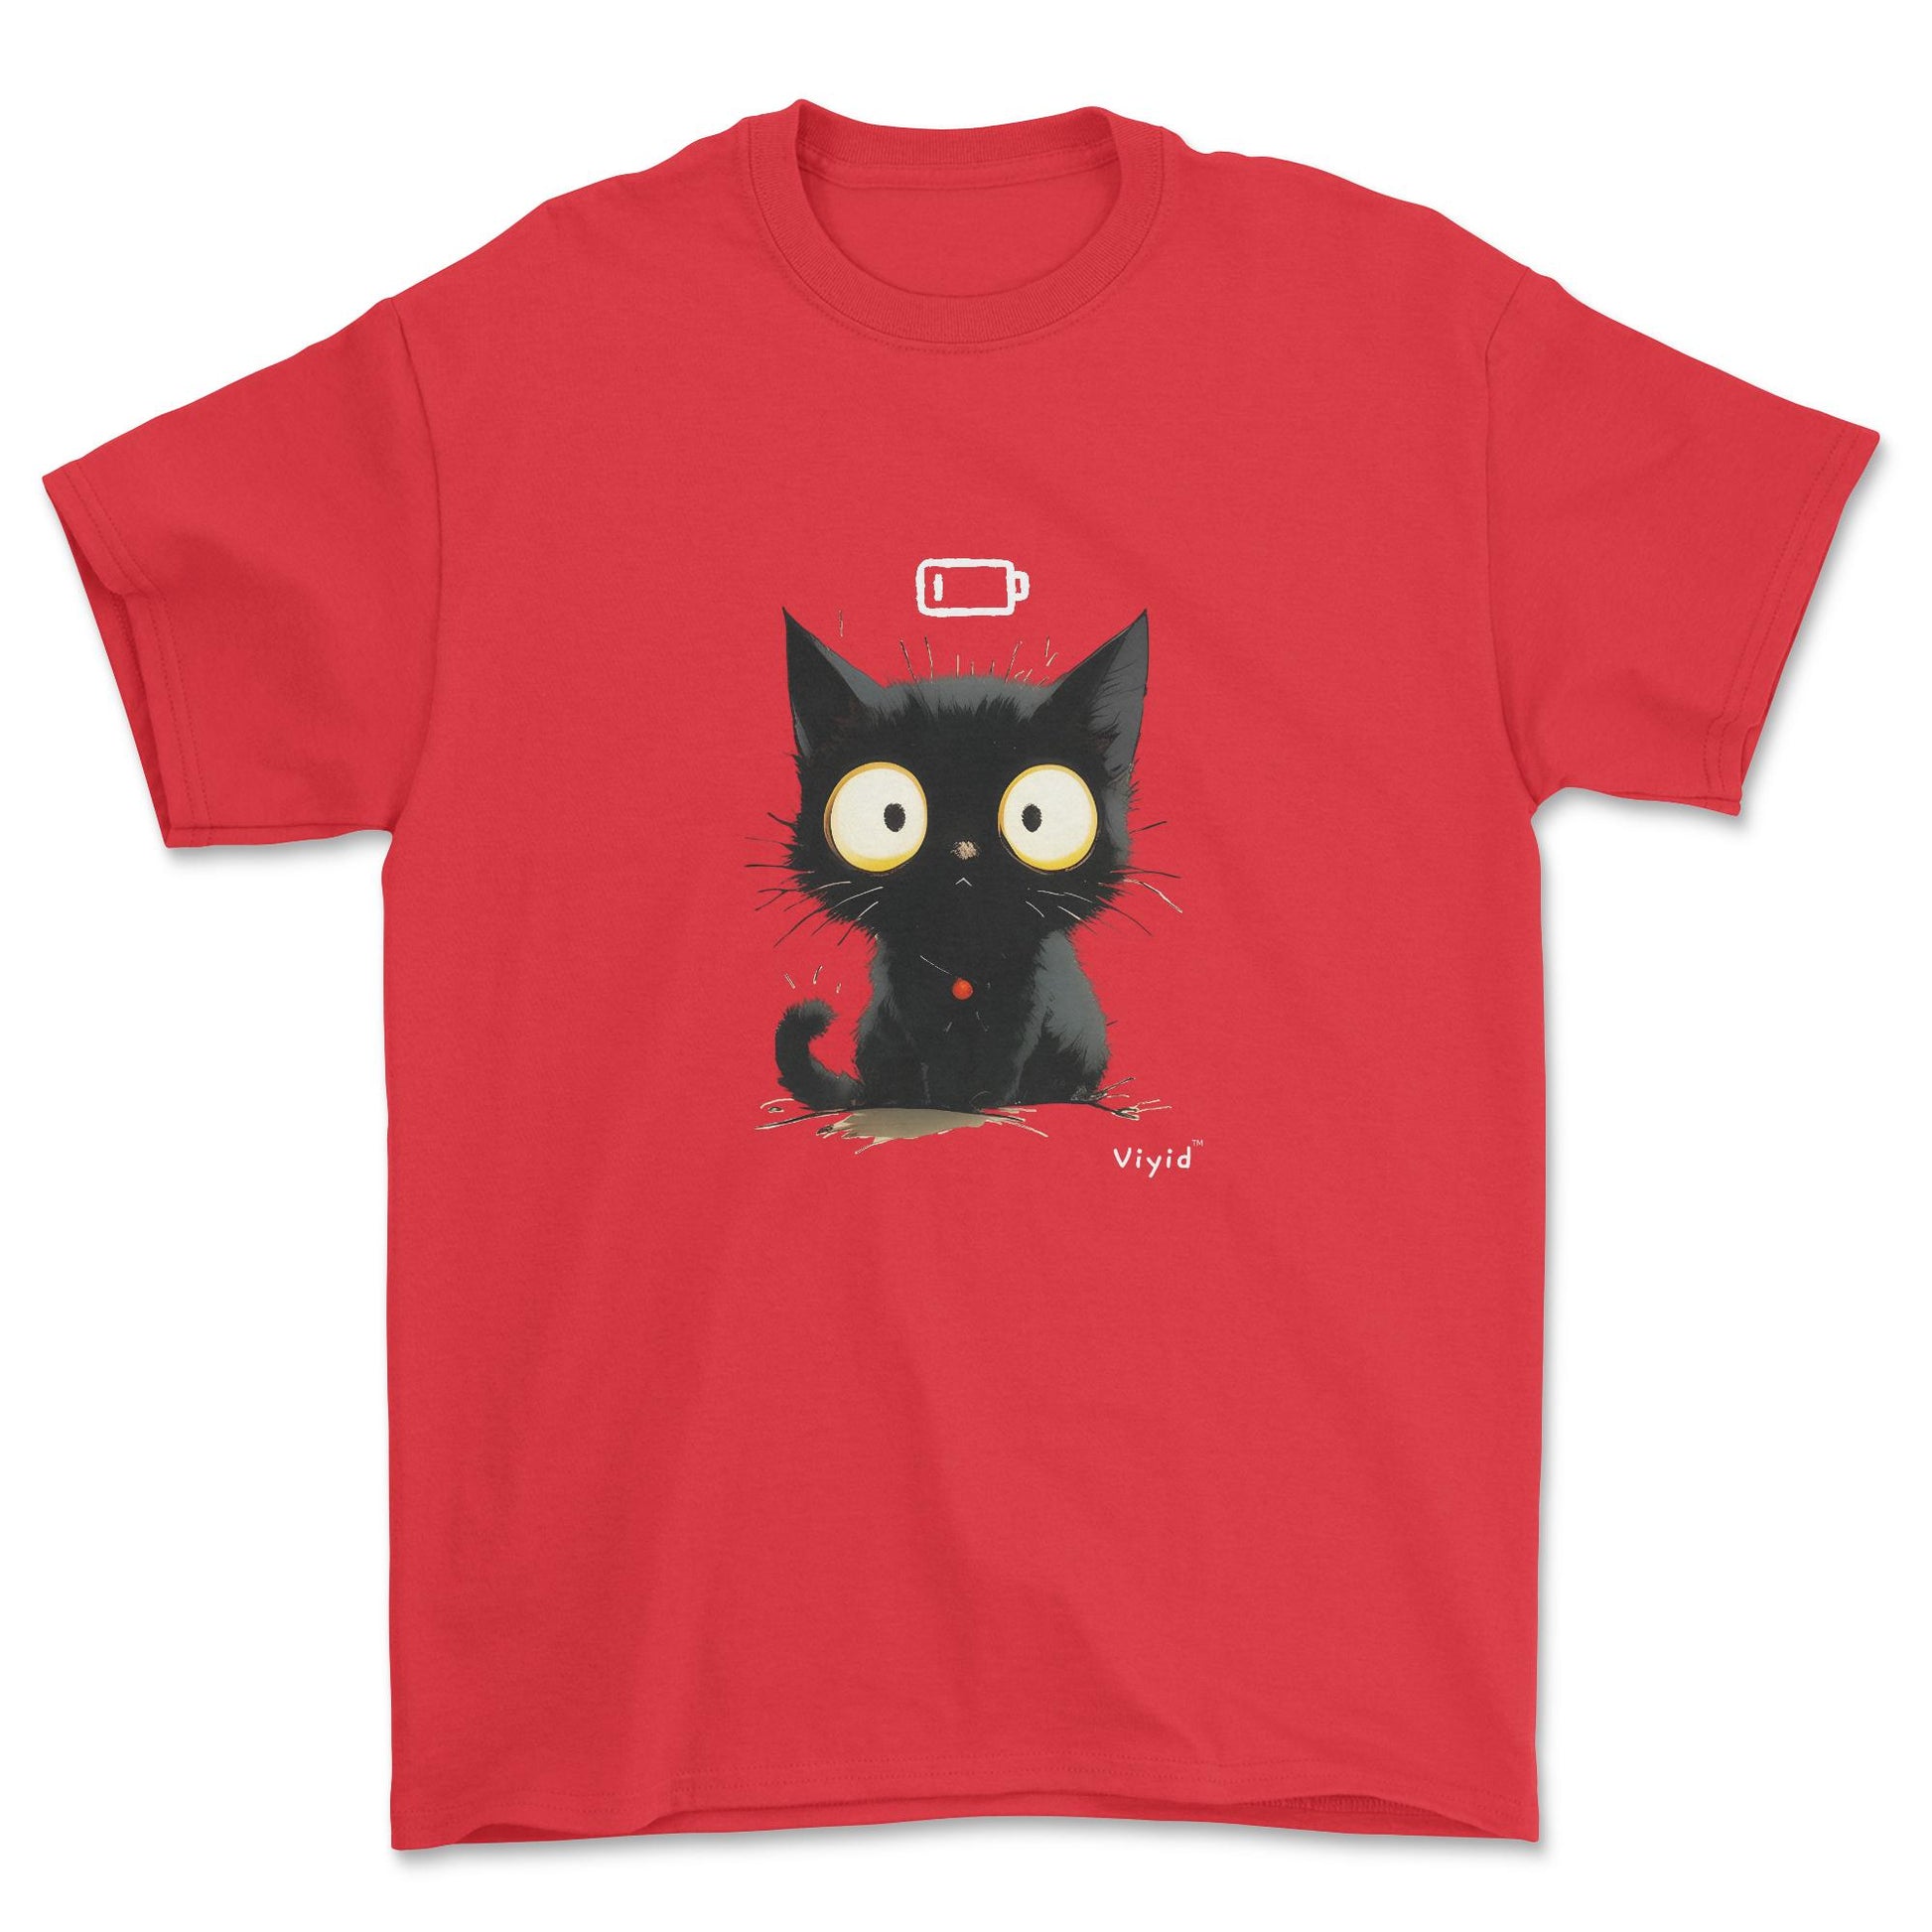 Low battery black cat youth t-shirt red